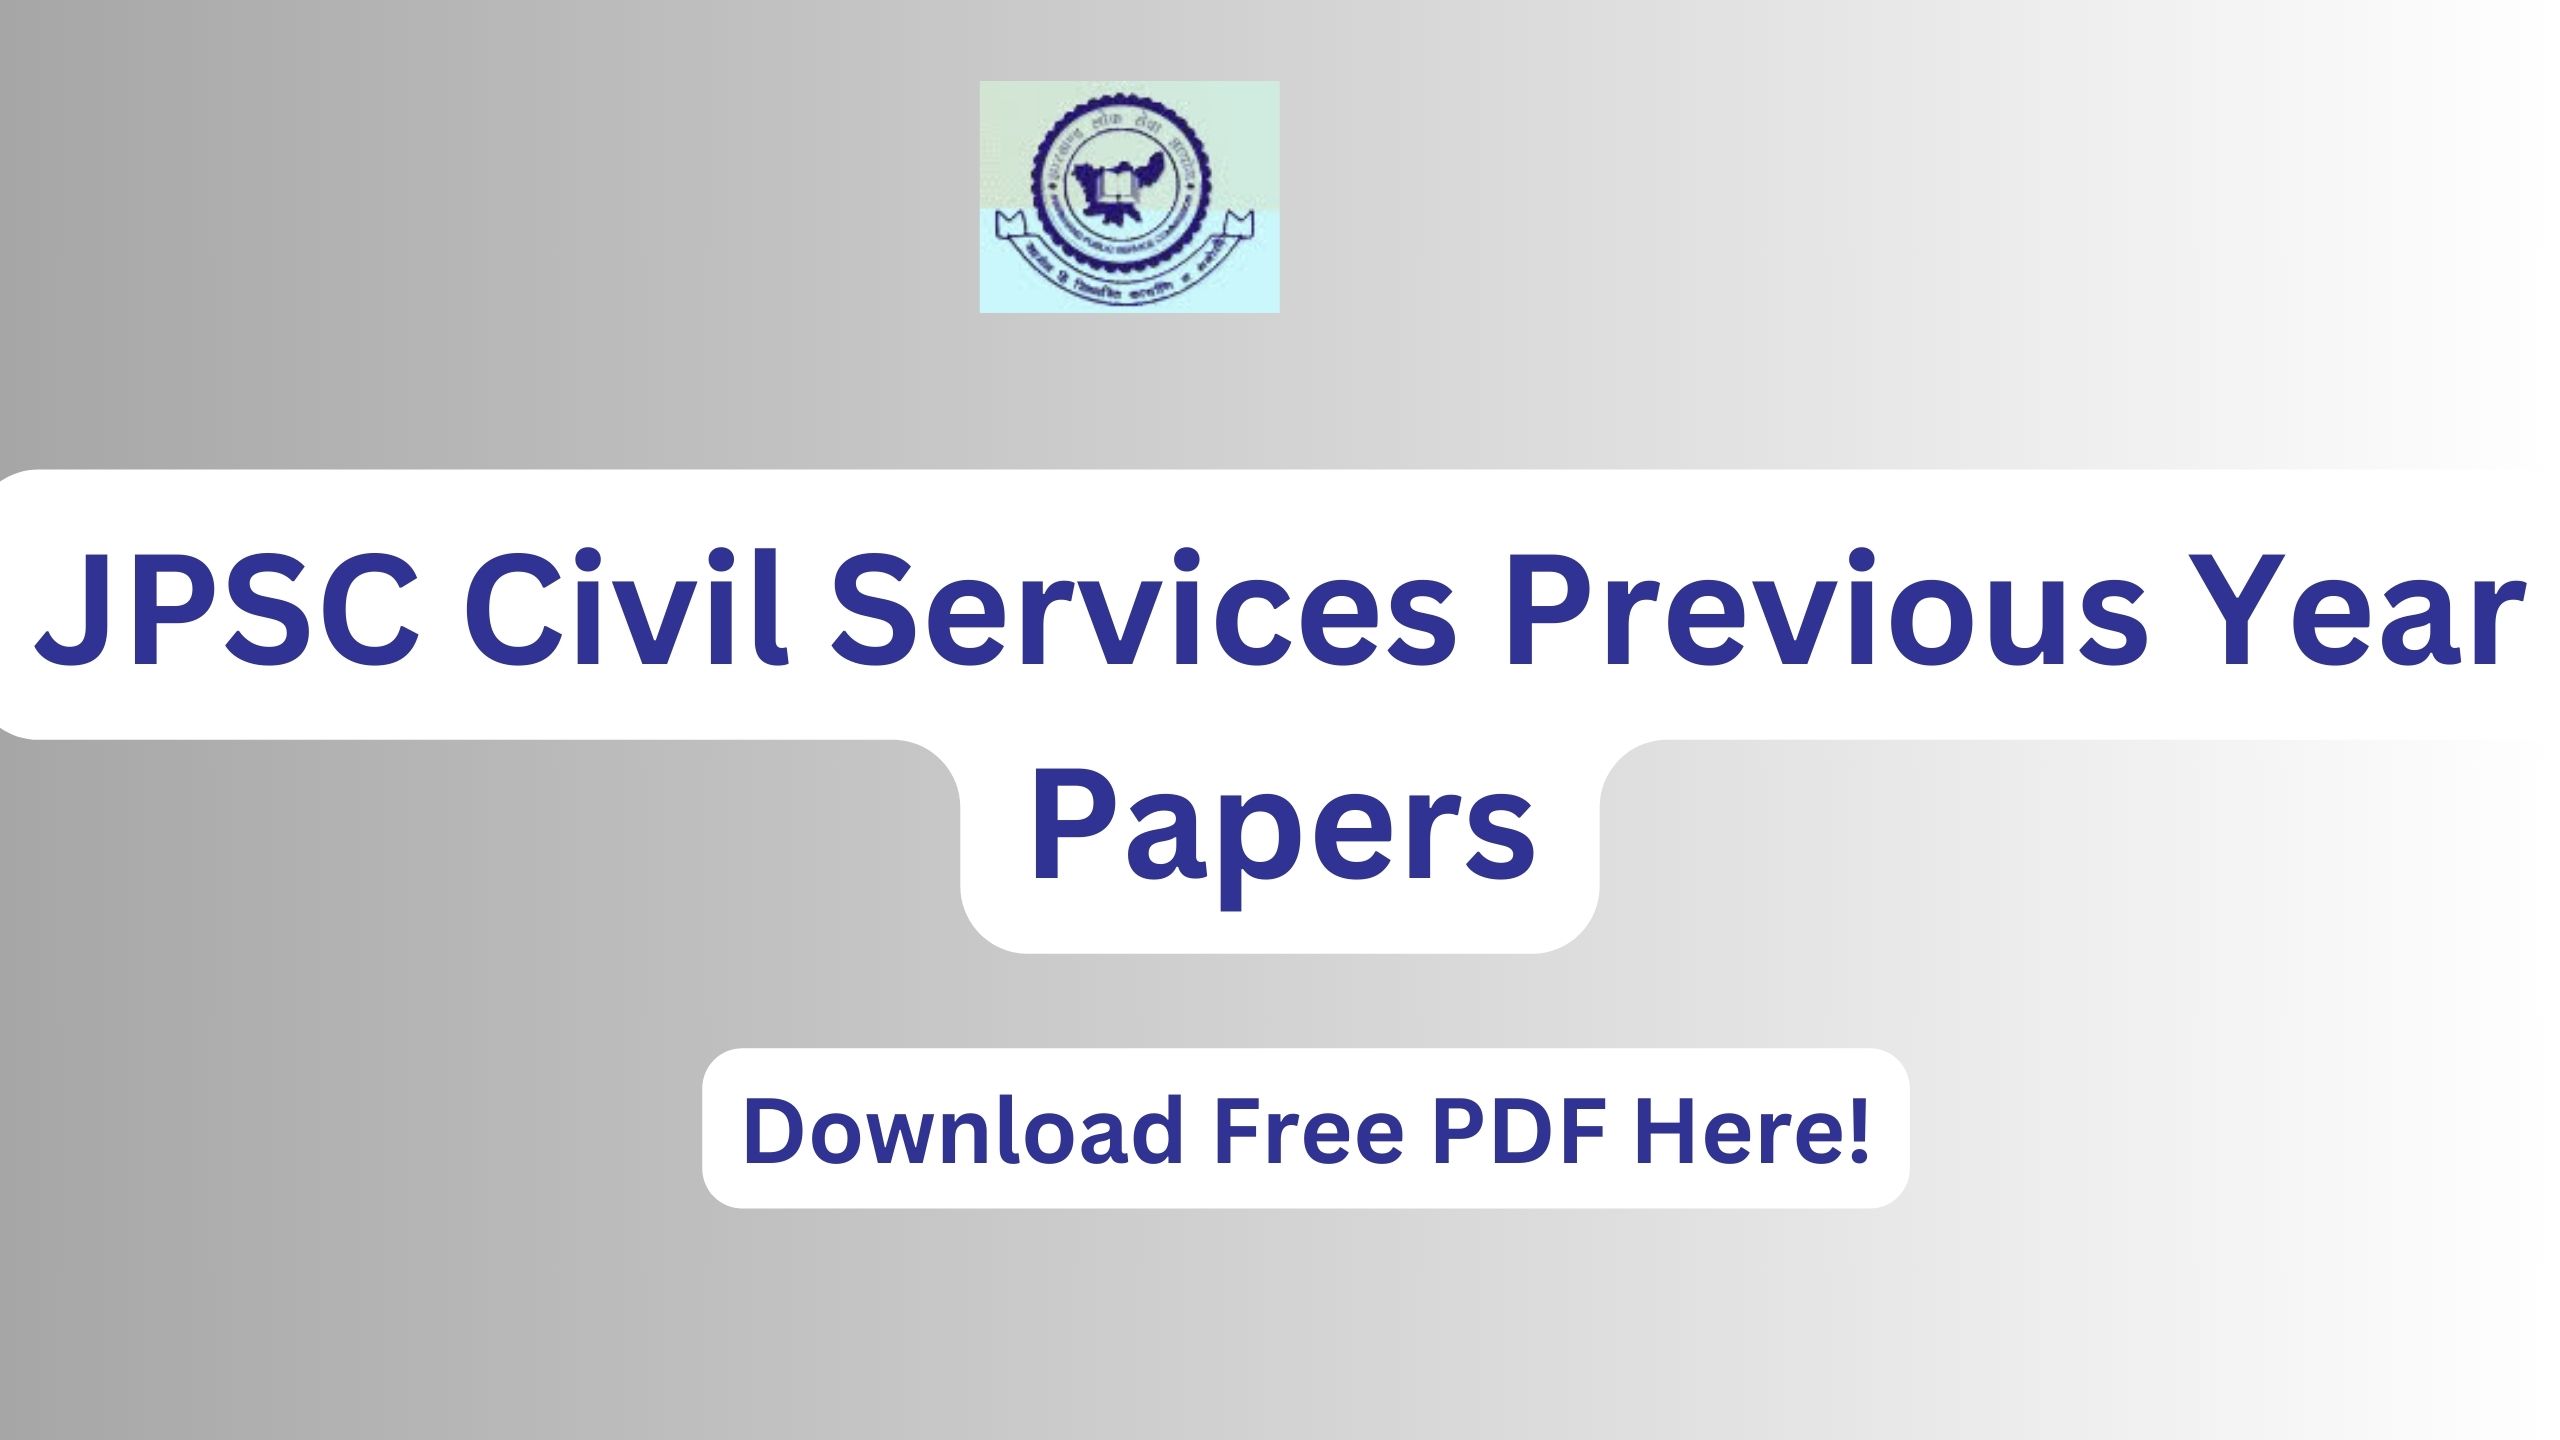 JPSC Civil Services Previous Year Papers